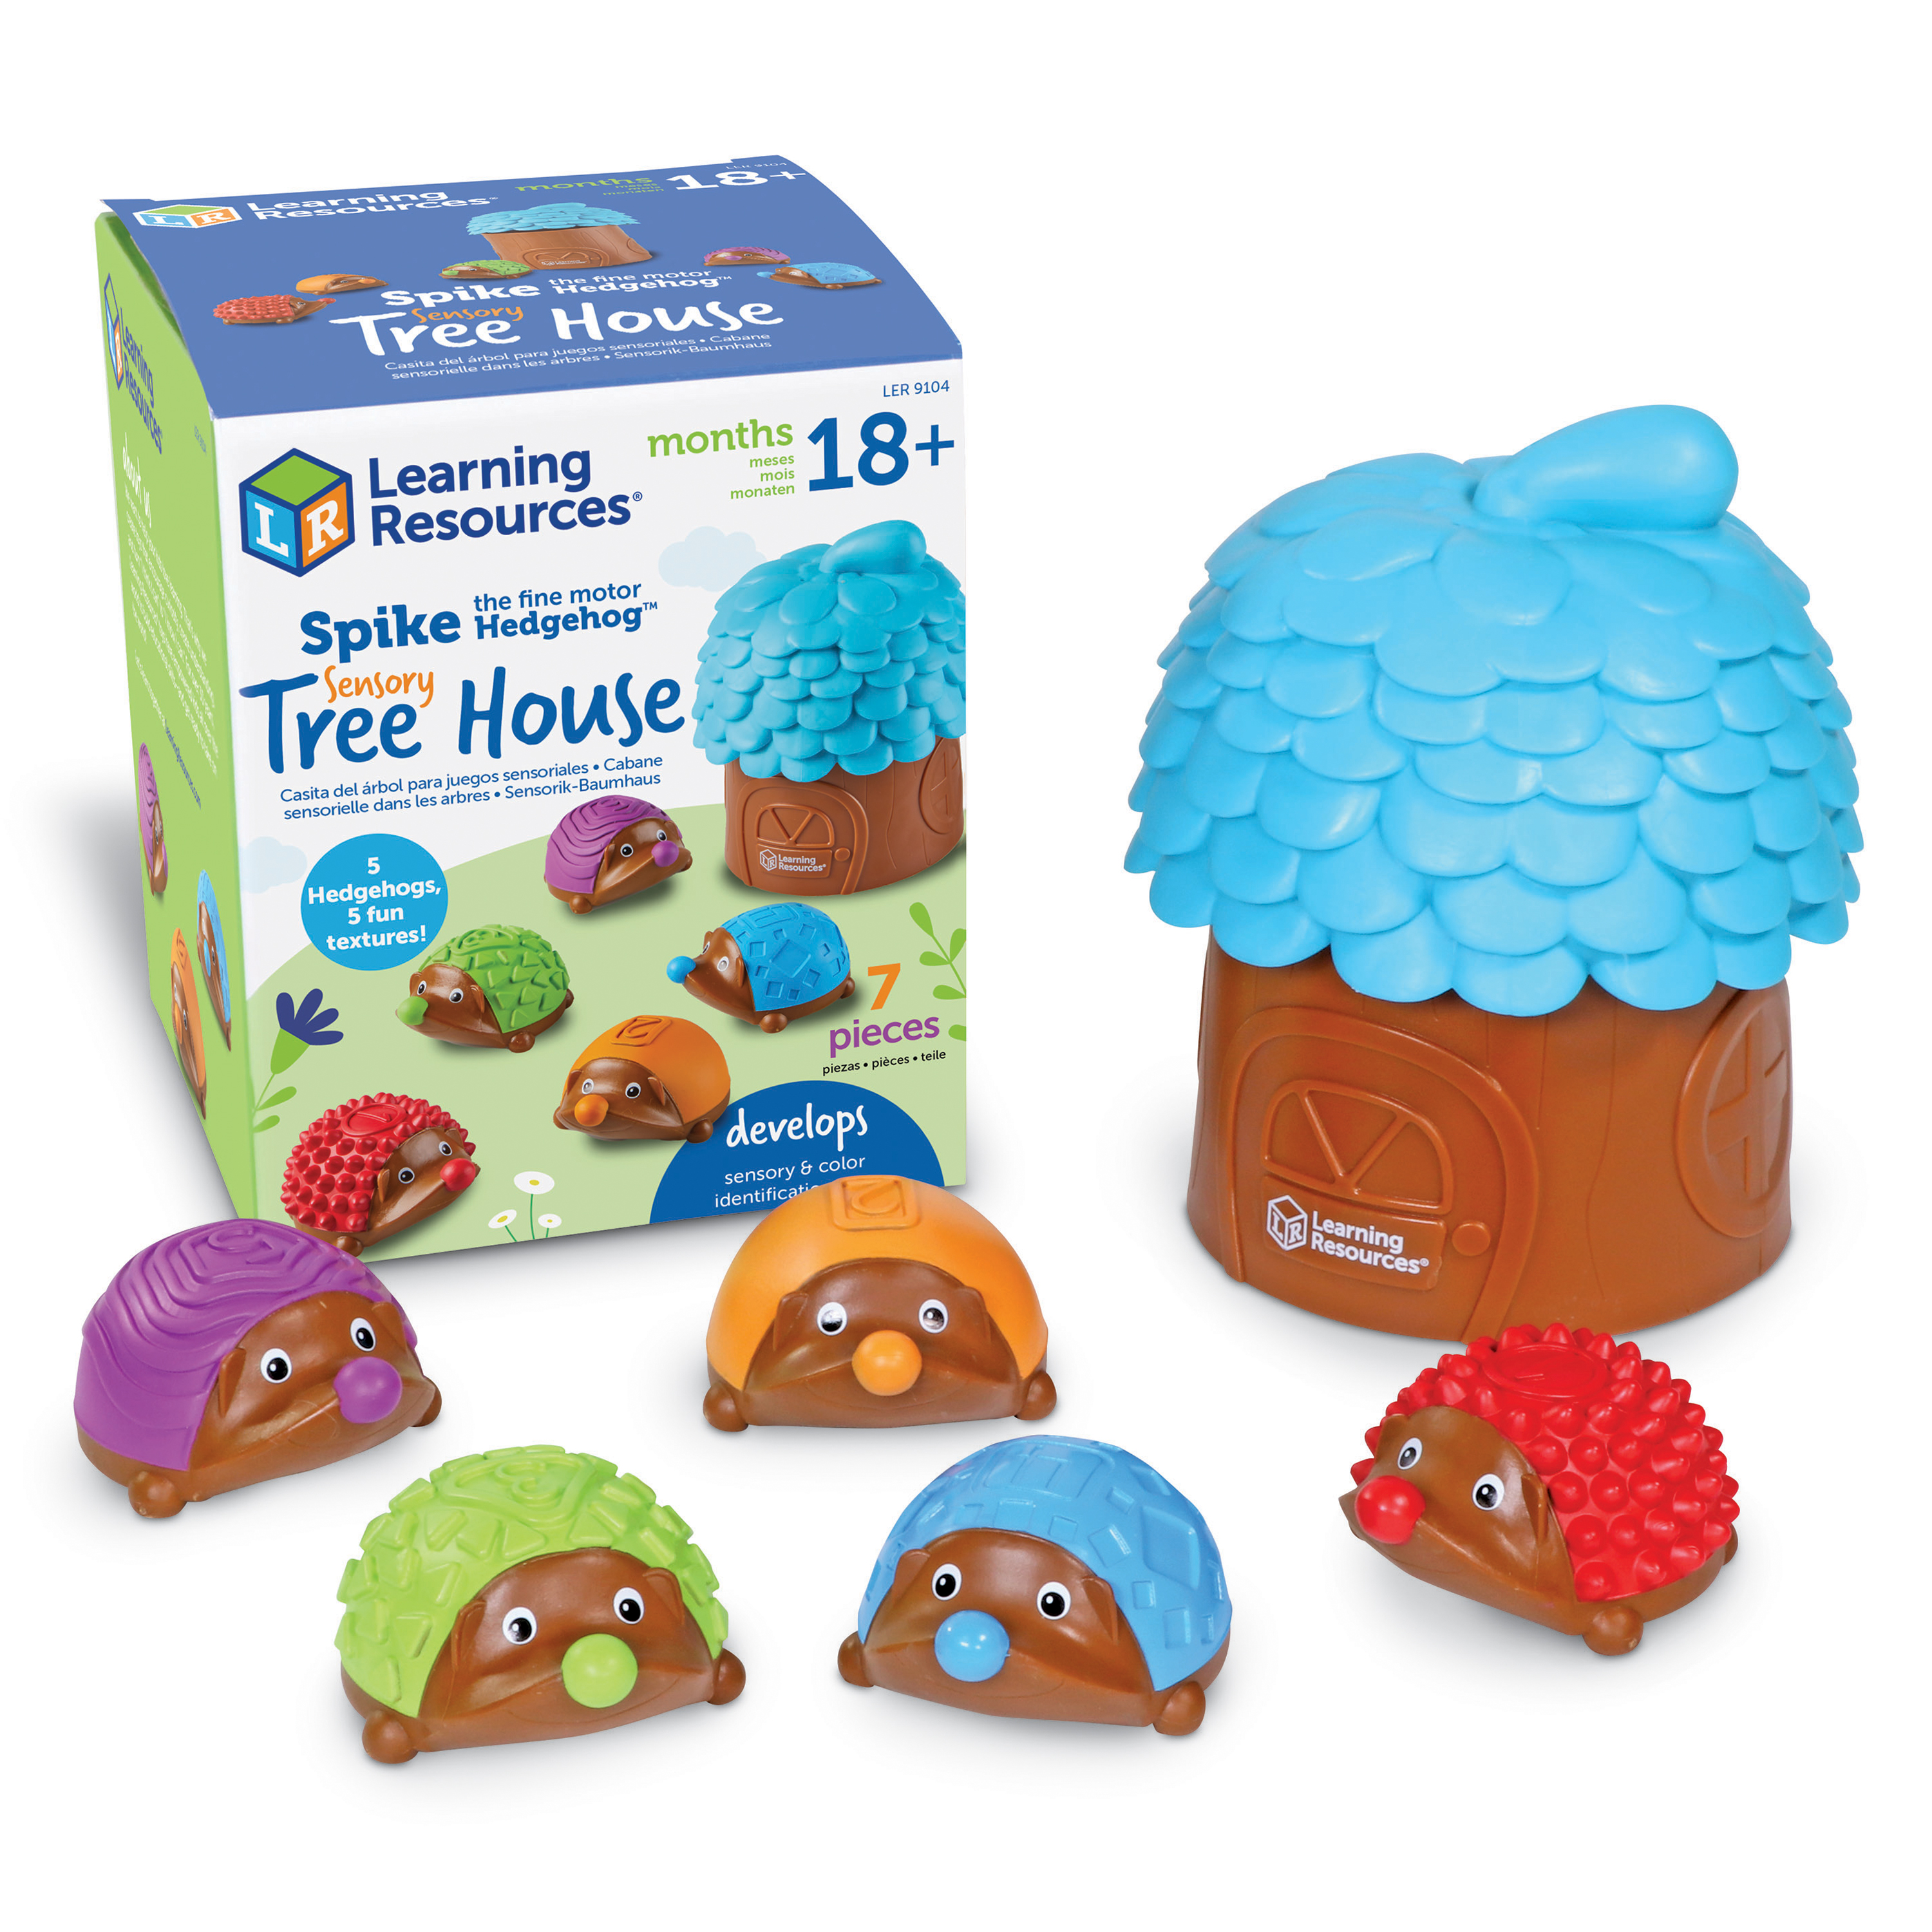 Learning Resources Spike the Fine Motor Hedgehog Sensory Tree House - 7 Pieces, Preschool Learning Toys for Boys and Girls Ages 18+ months - image 1 of 6